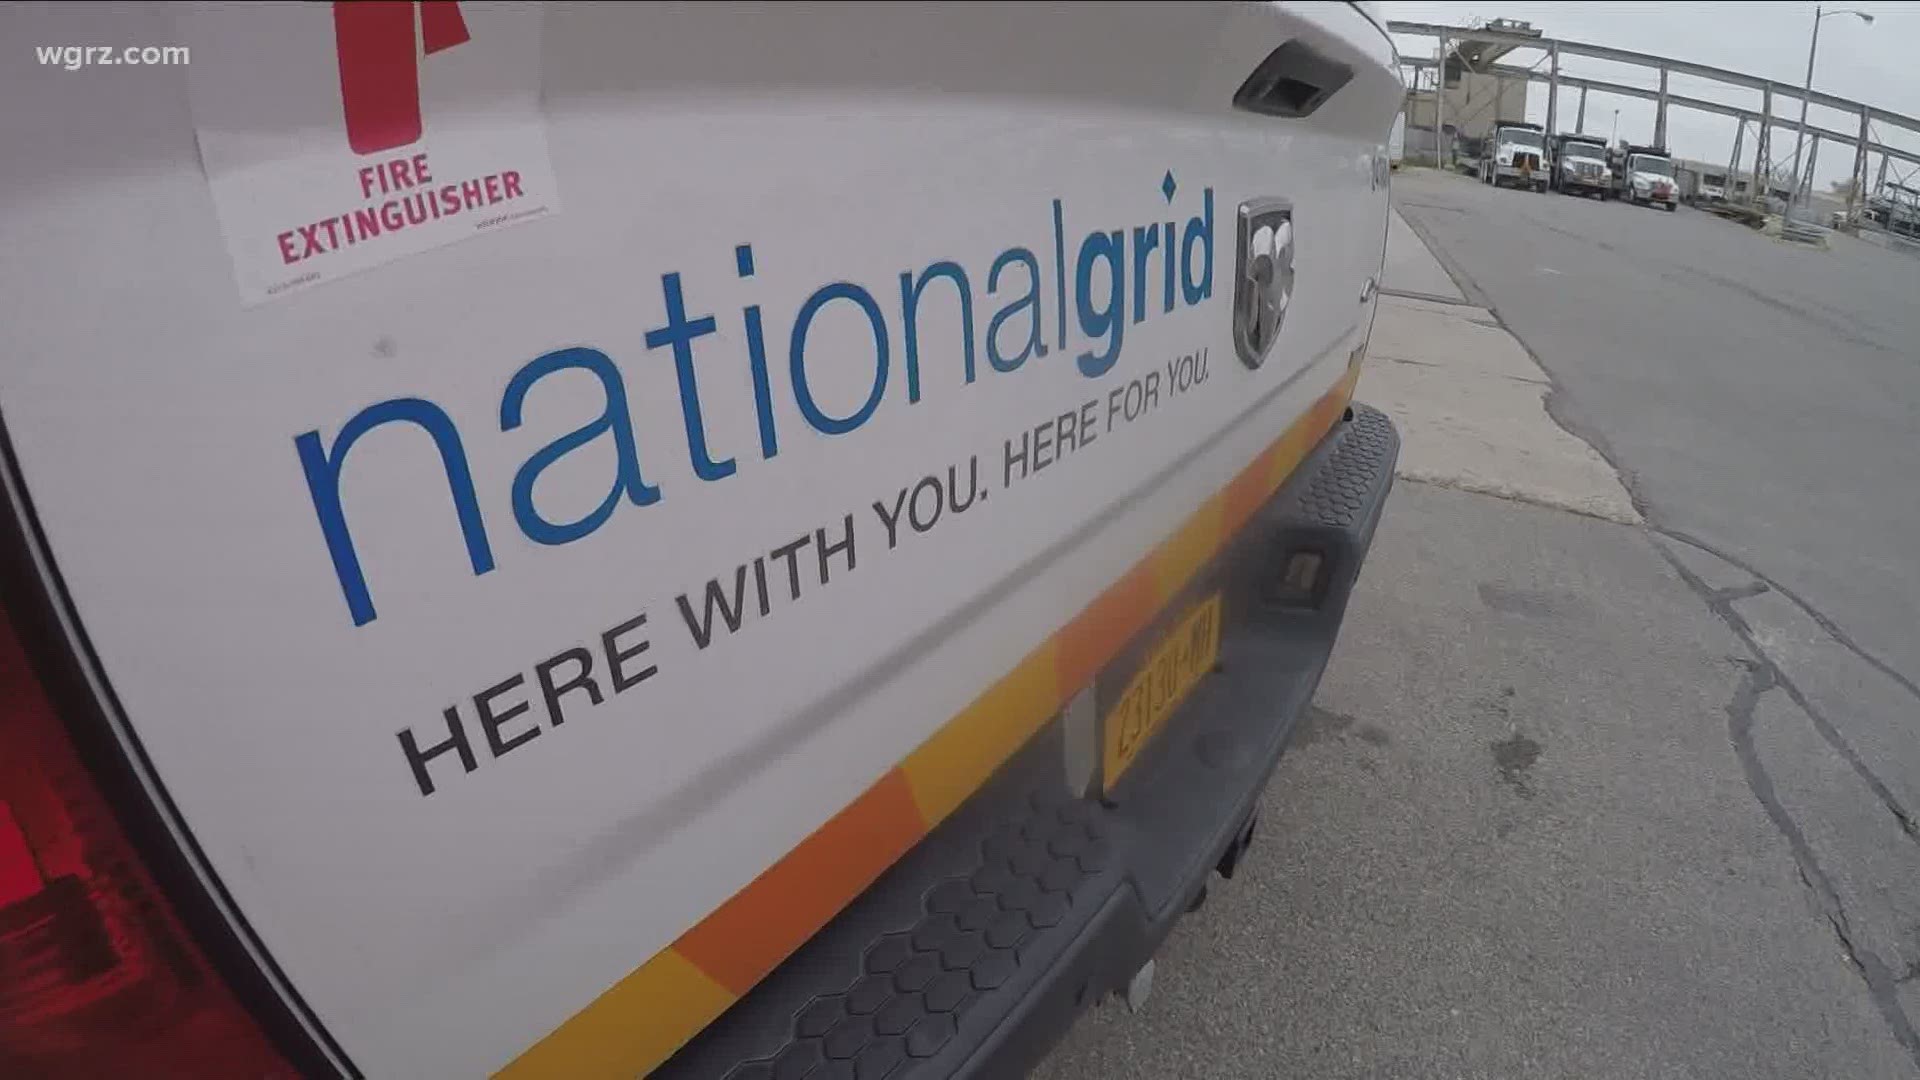 National Grid contacting customers impacted to reduce energy use